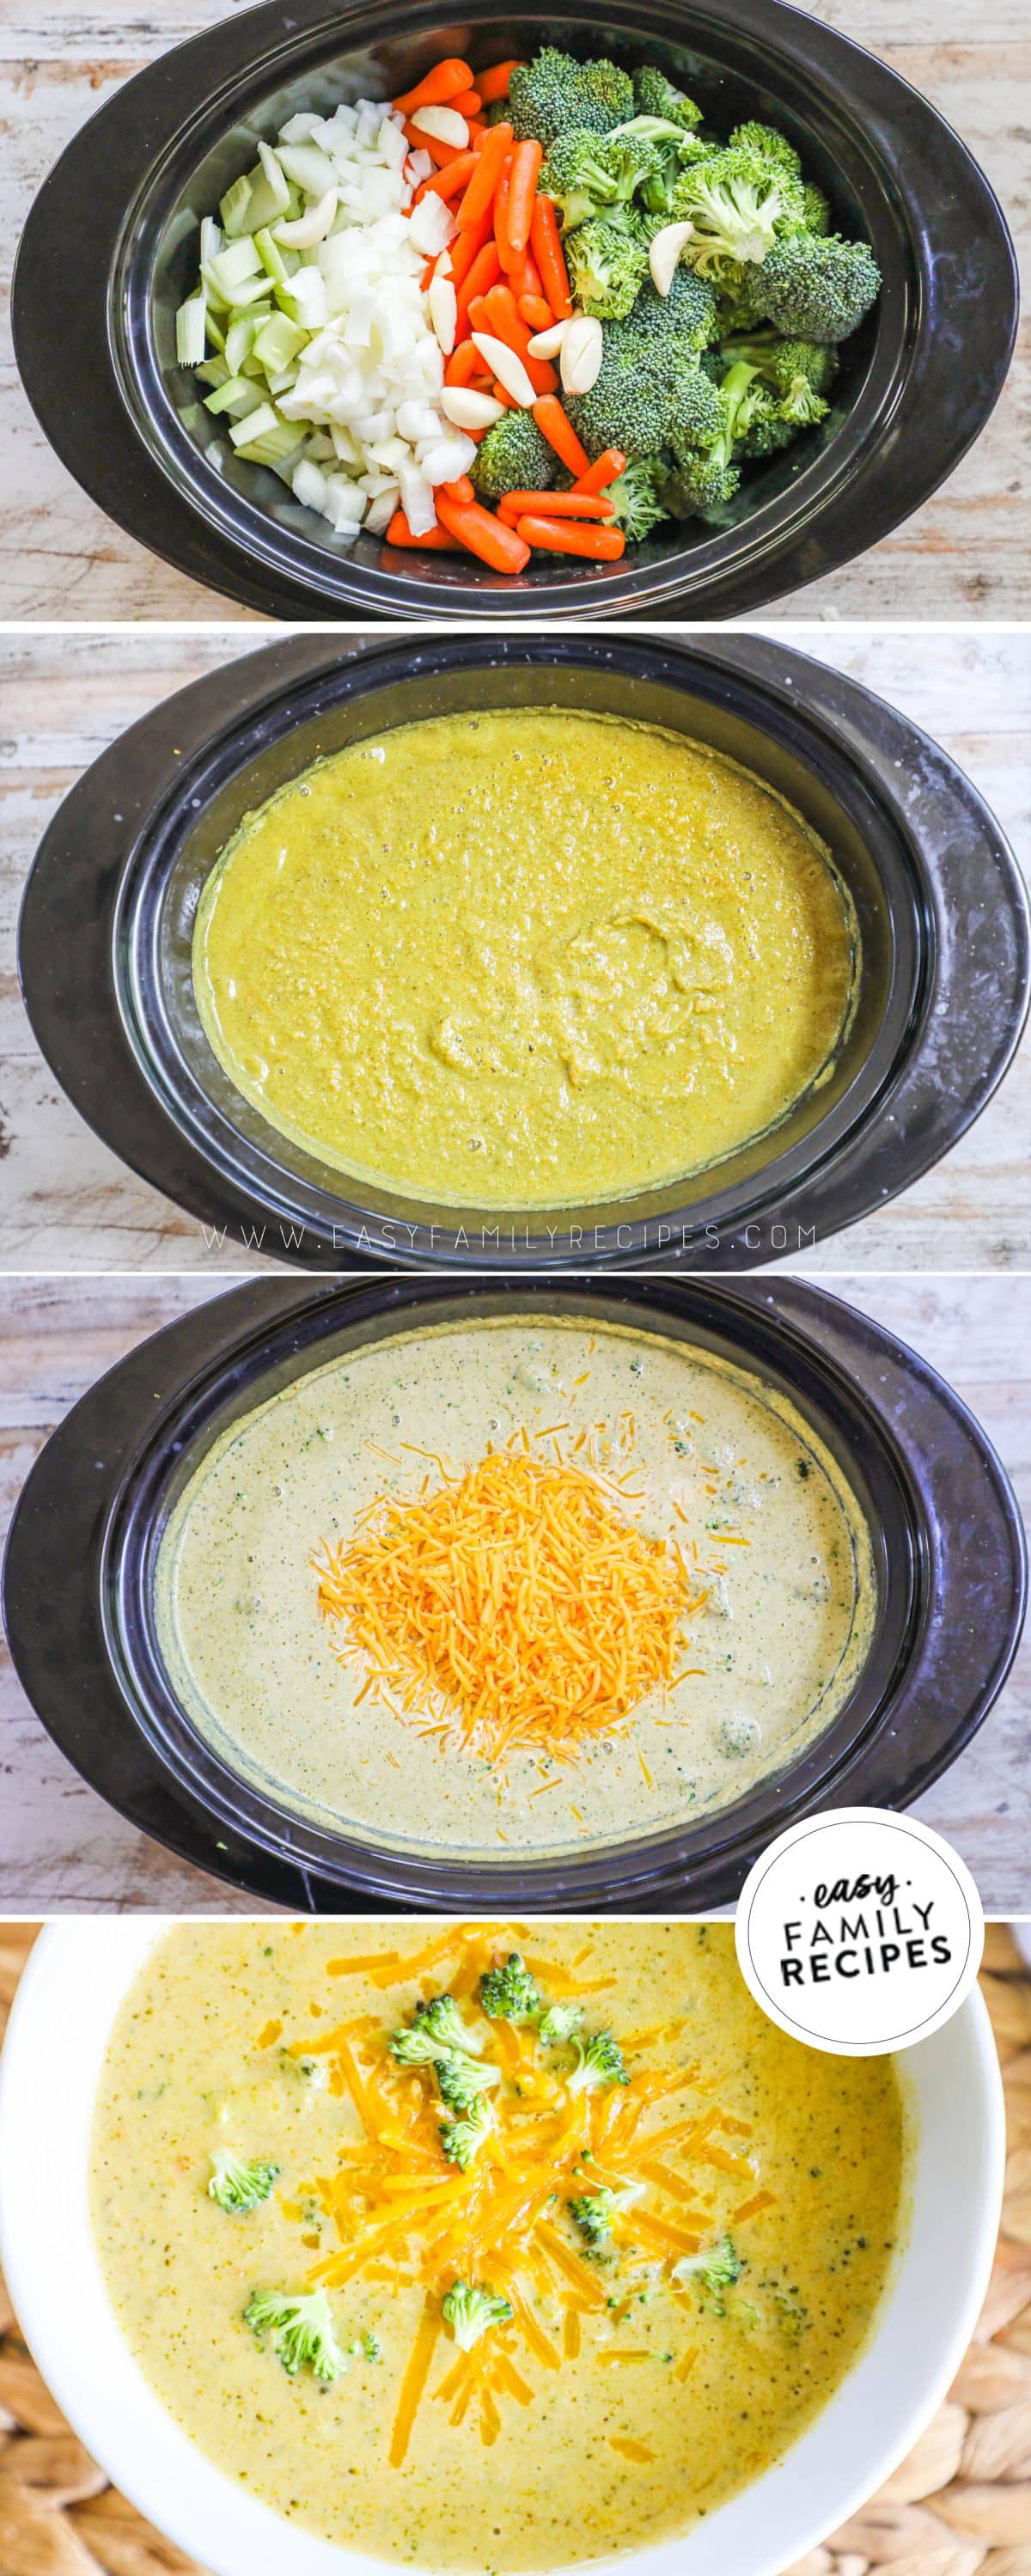 how to make slow cooker broccoli cheese soup 1)add veggies to the crock pot 2)puree when tender 3)add cream and cheese 4)serve with more cheese